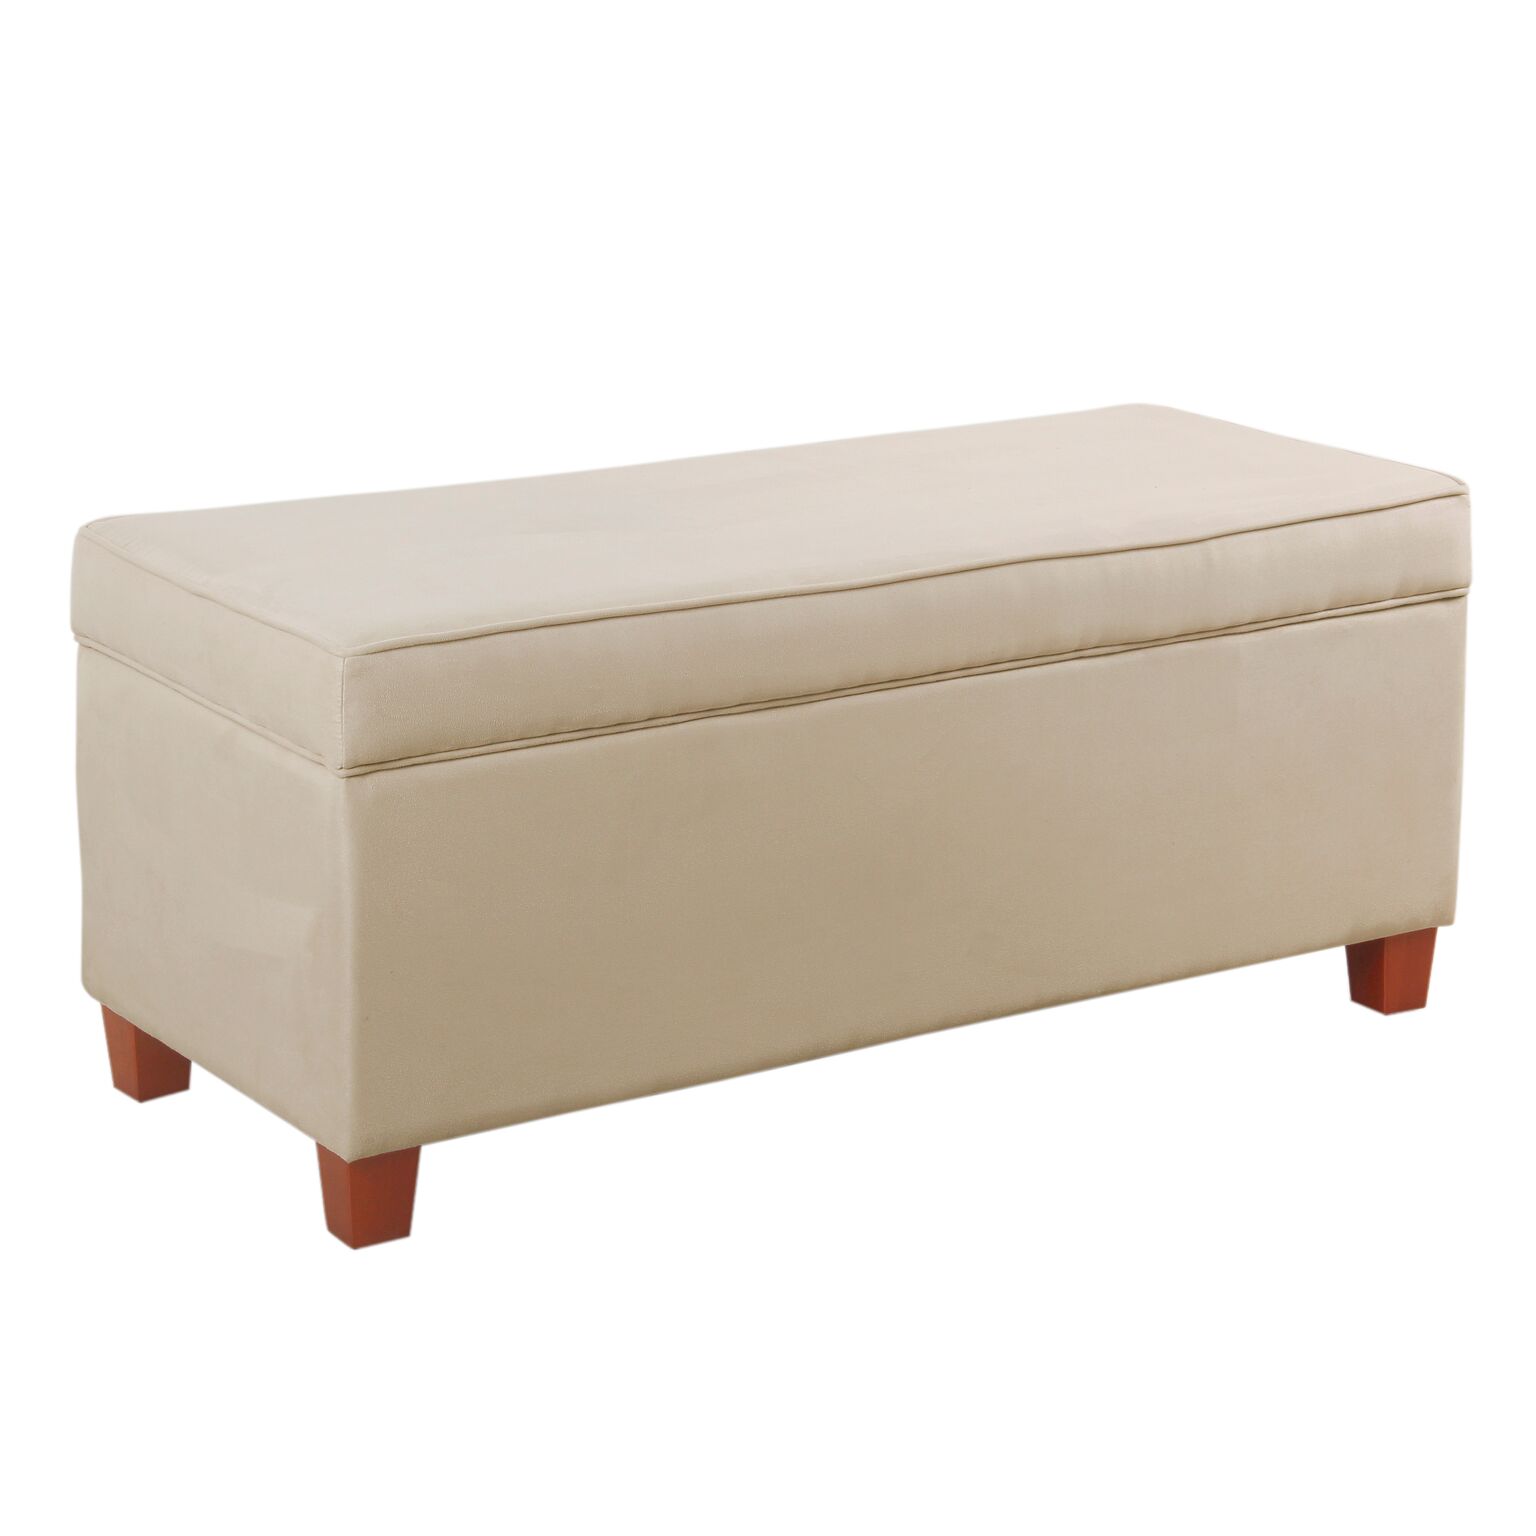 HomePop End of Bed Storage Bench, Cream - image 3 of 6